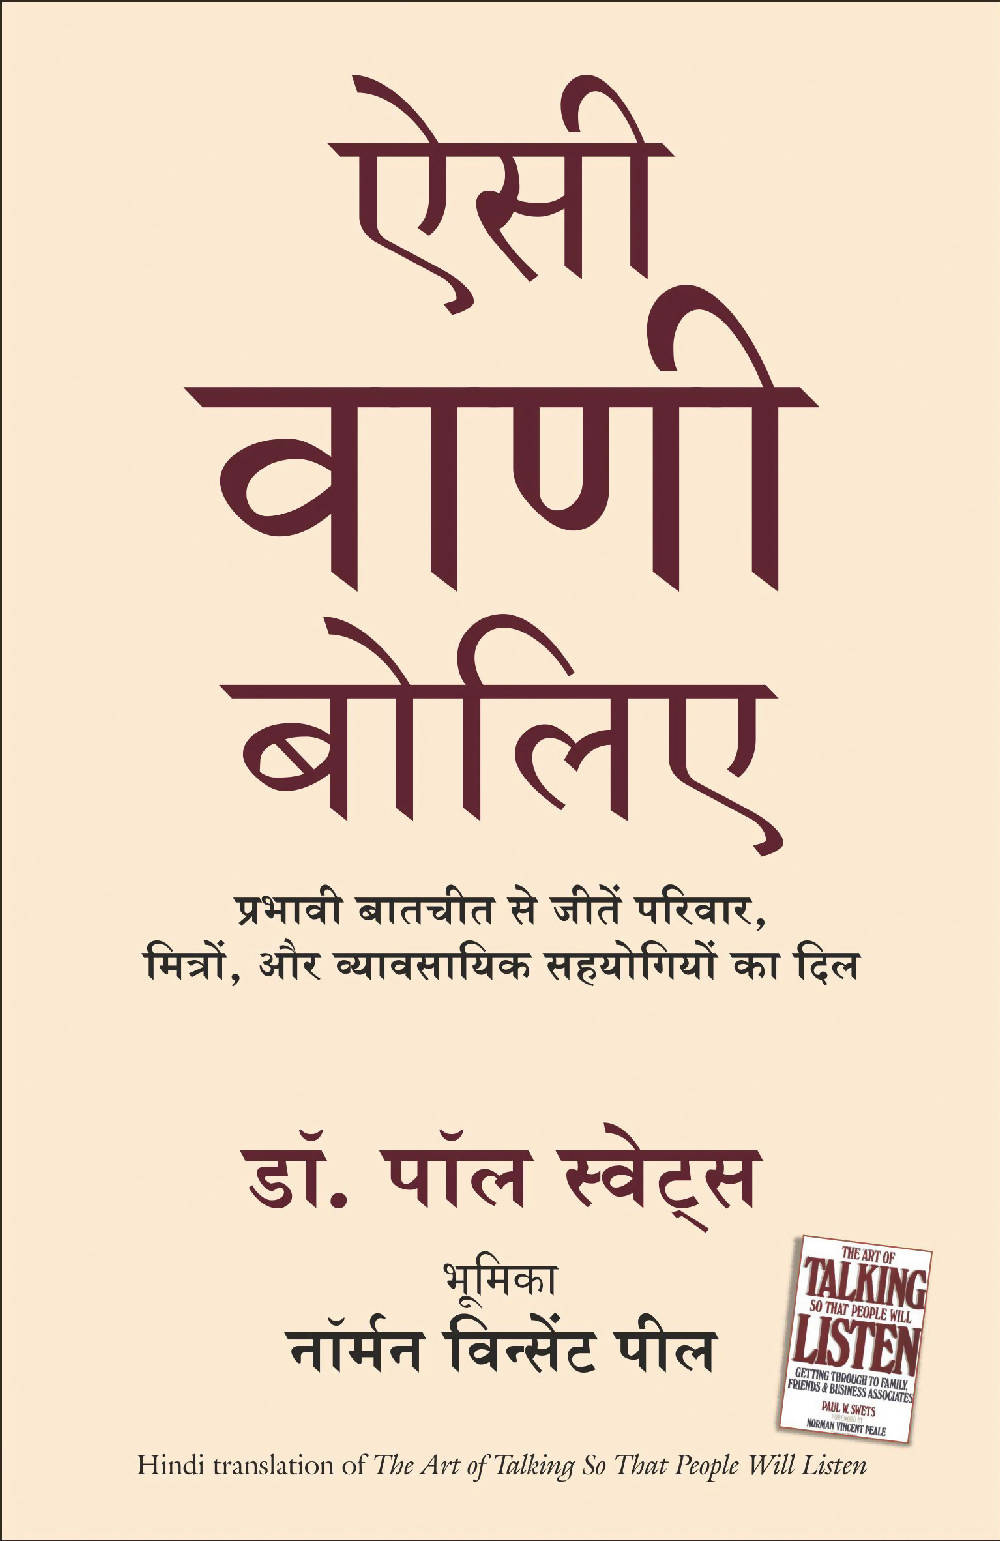 Aisi Vani Boliye (Hindi Edition Of 'The Art Of Talking So That People Will Listen')